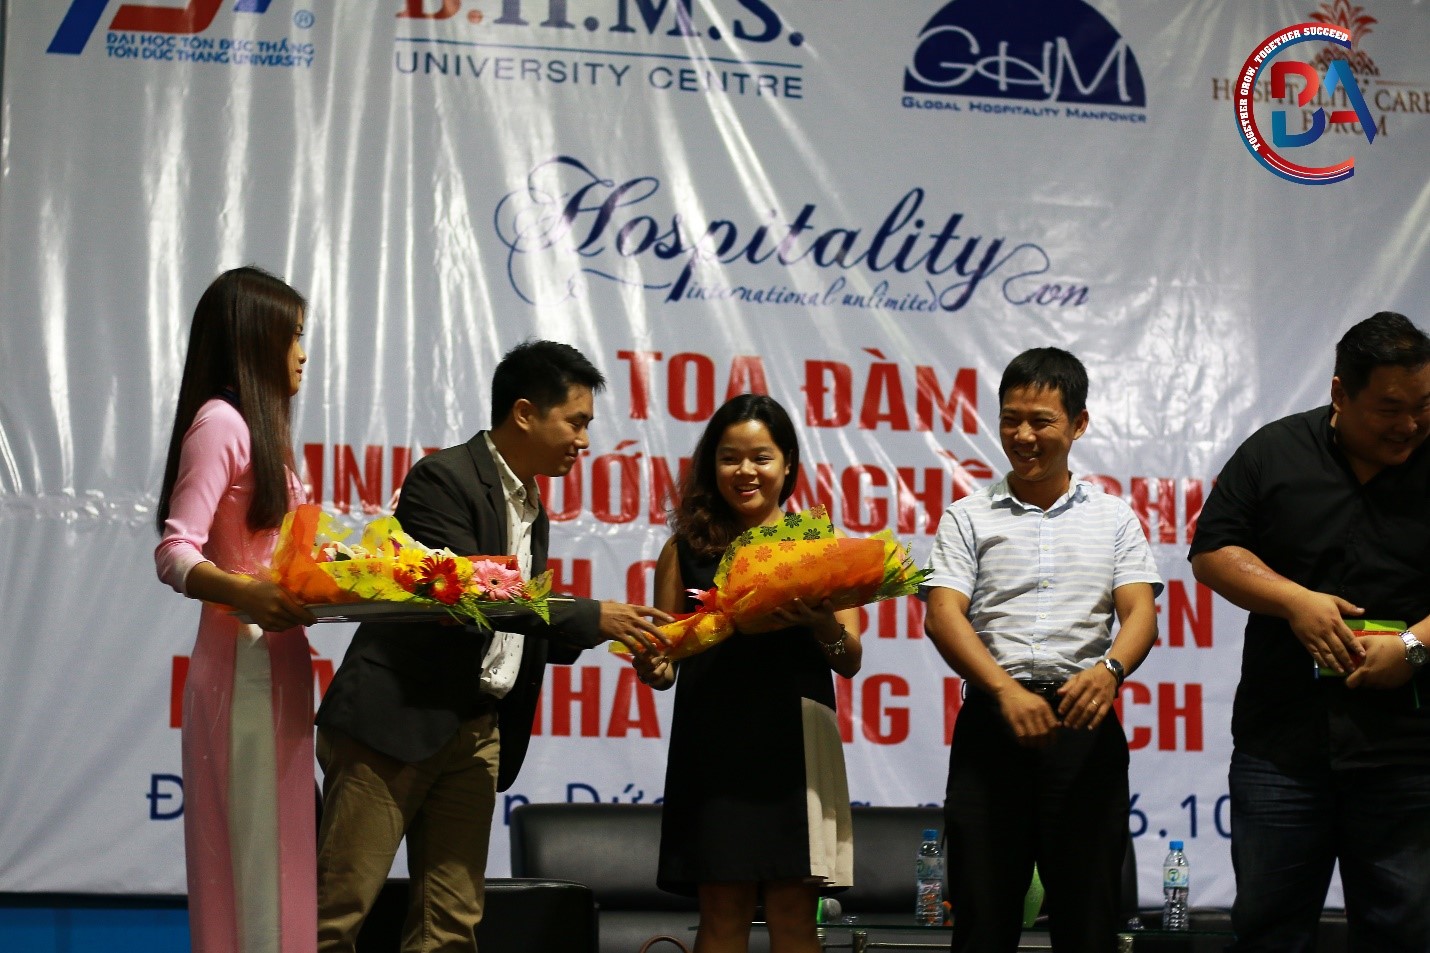 At the end of the Talkshow, MSc. Truong Nu To Giang gave to guests some bouquets to thank for their appearance and sharings.